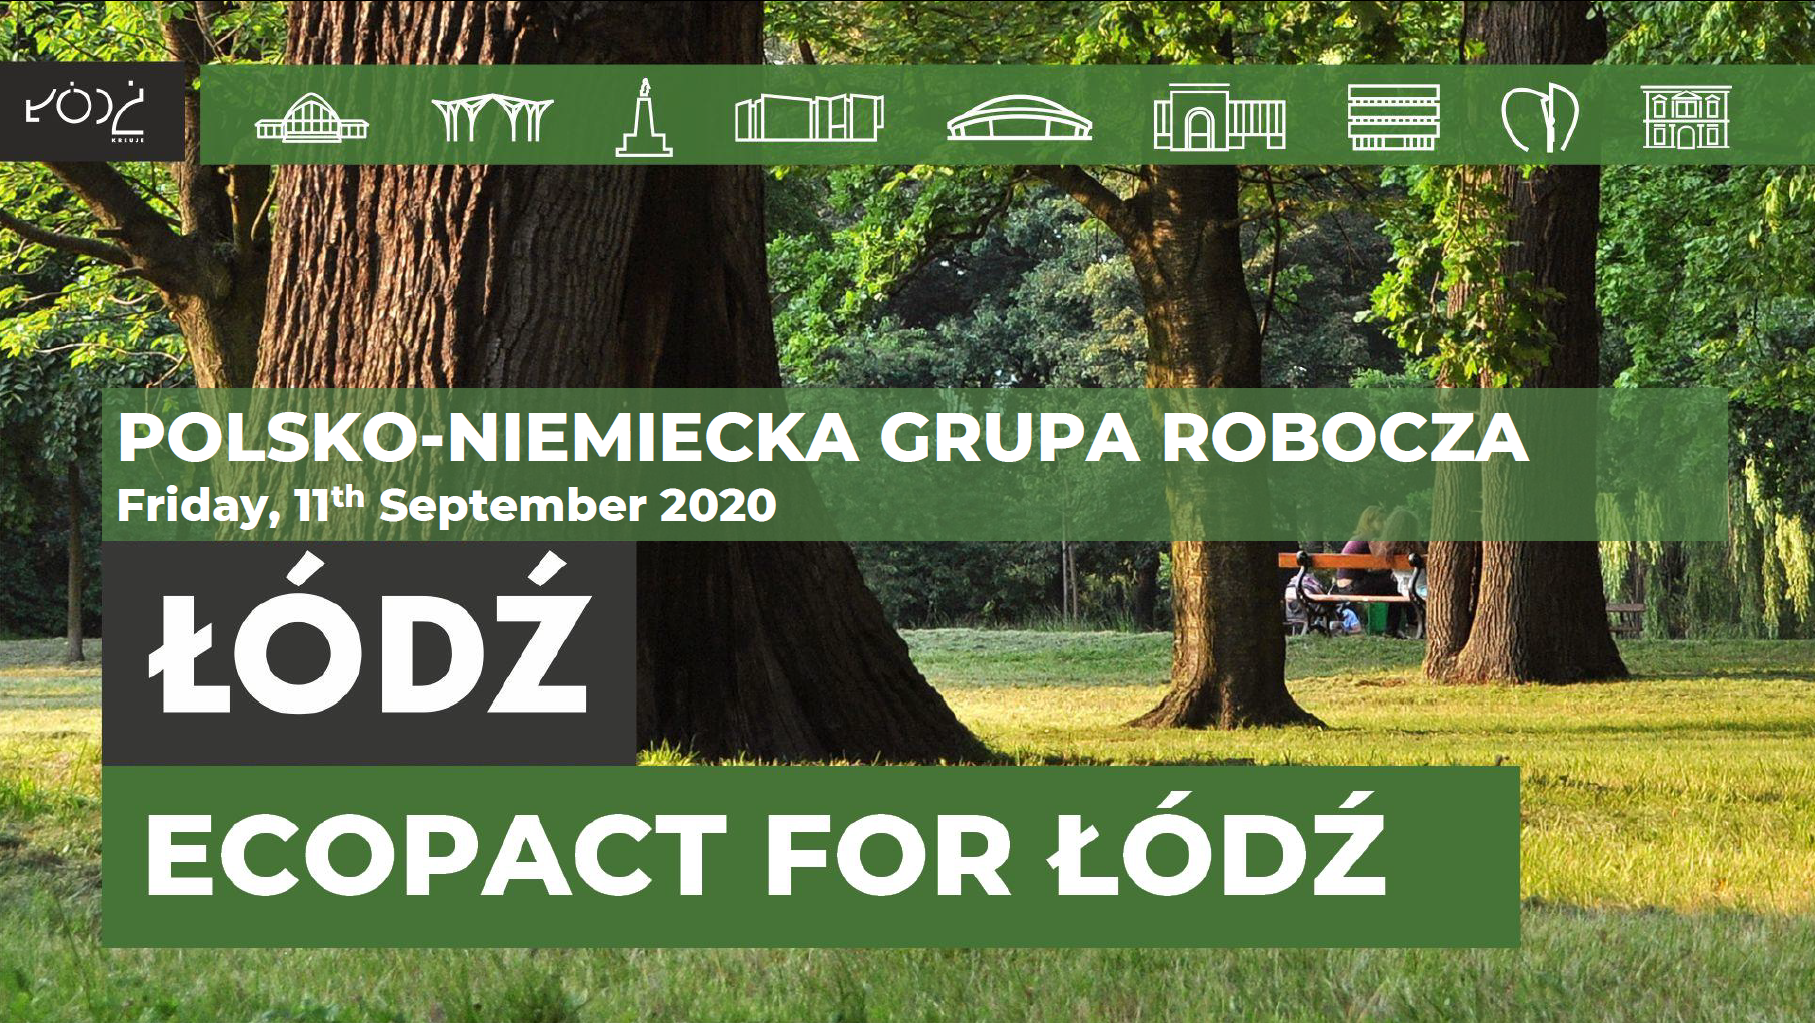 Introducing the ECOpact for Łódź, whose initia-tives fit with the European Green Deal themes